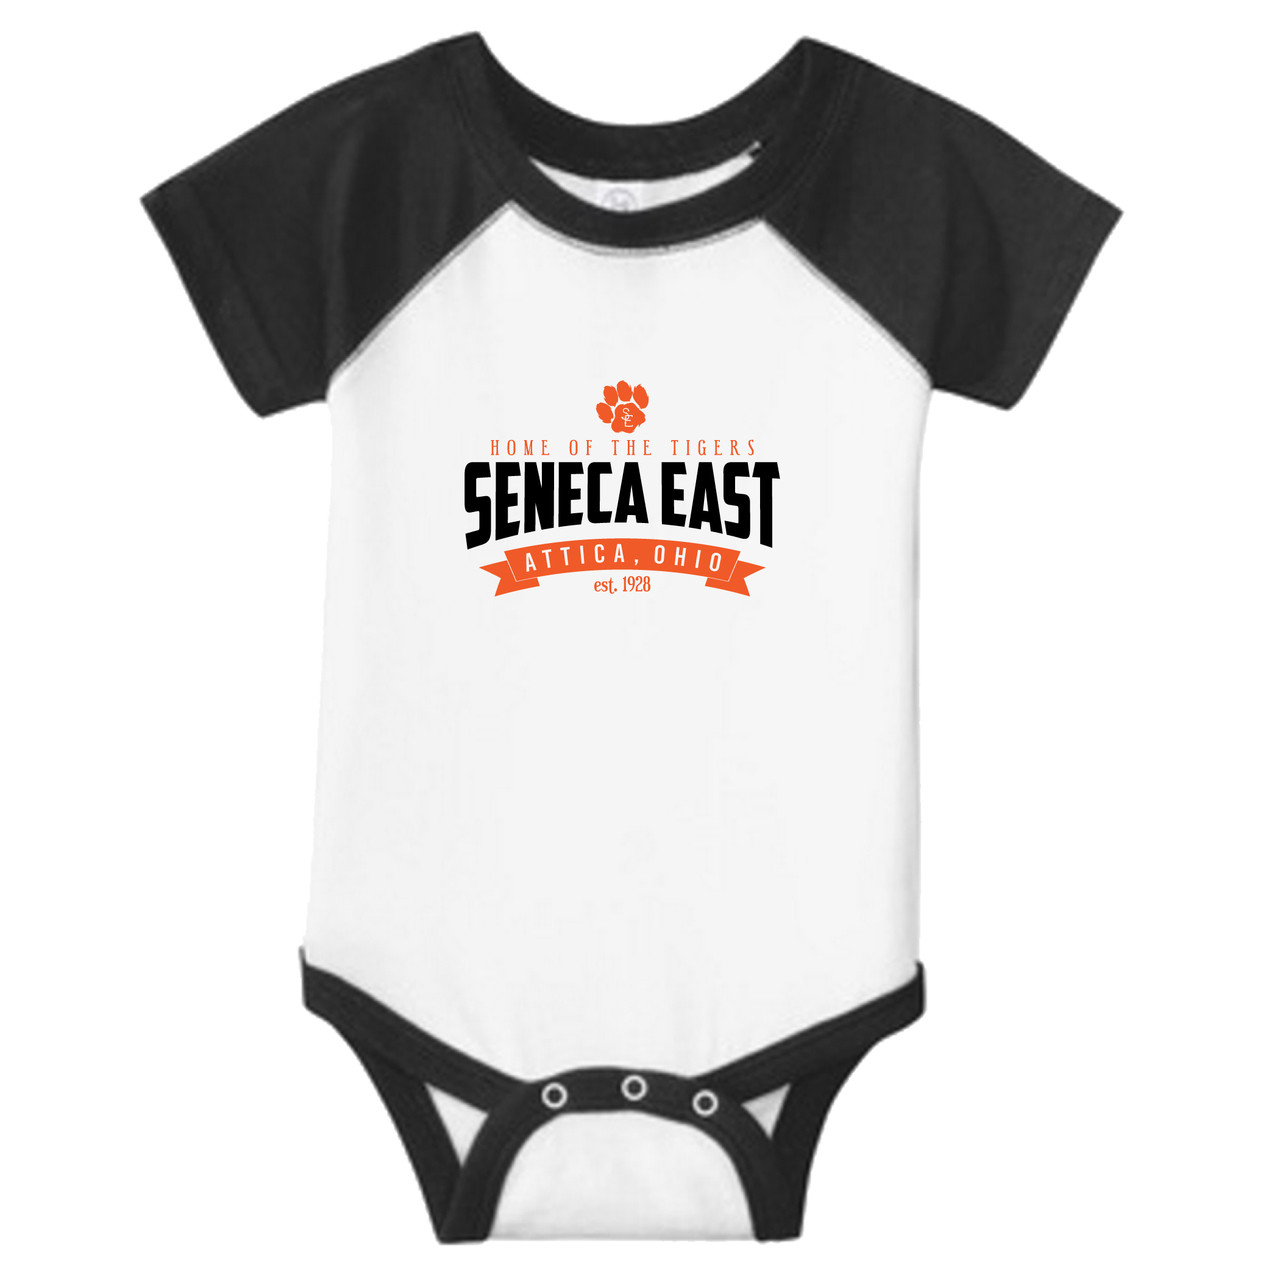 infant tigers jersey